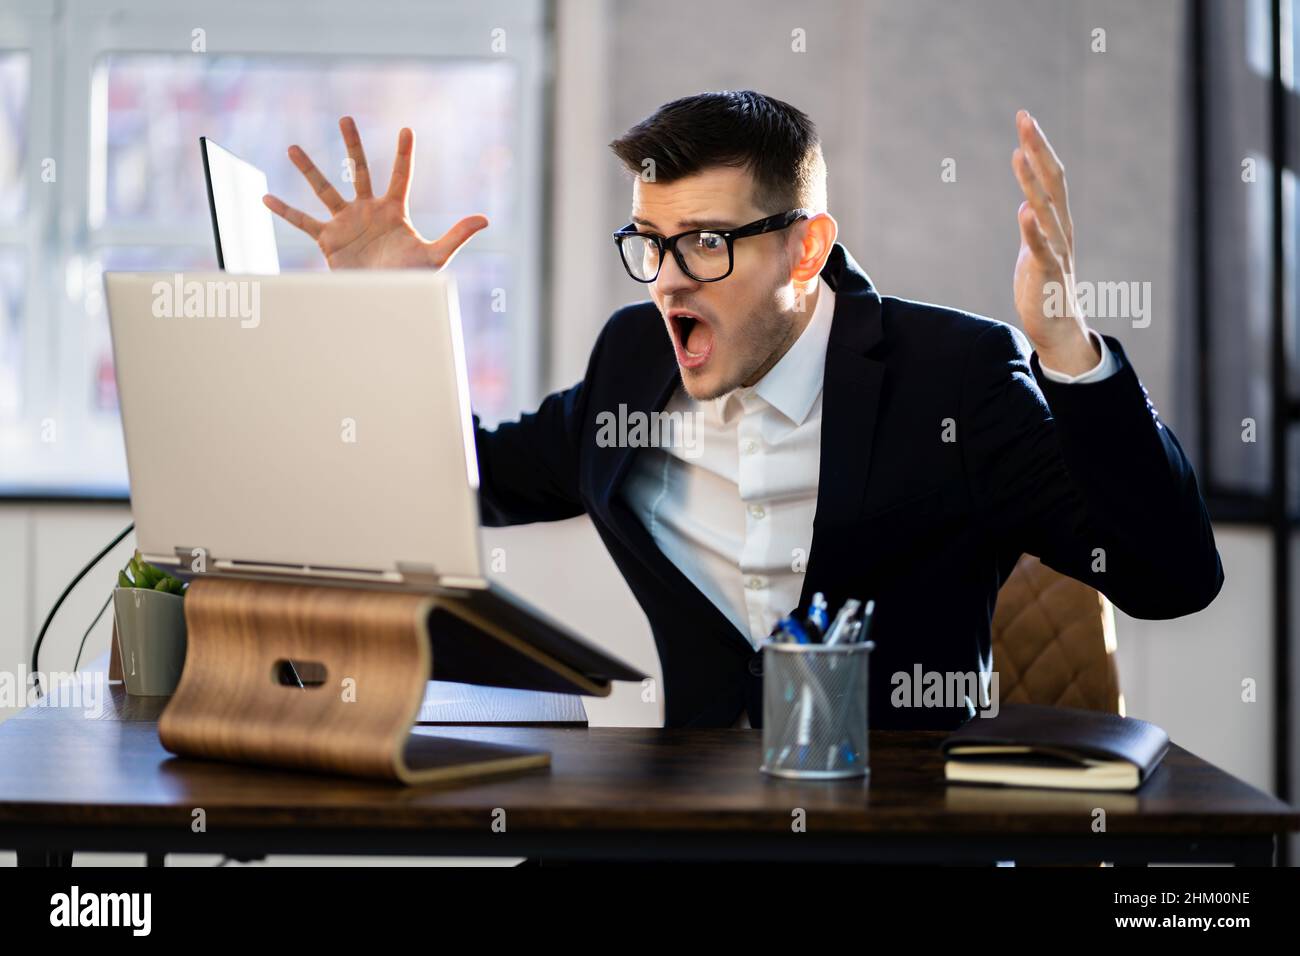 Bored Stressed Man. Tired Worrying Man Depressed Stock Photo